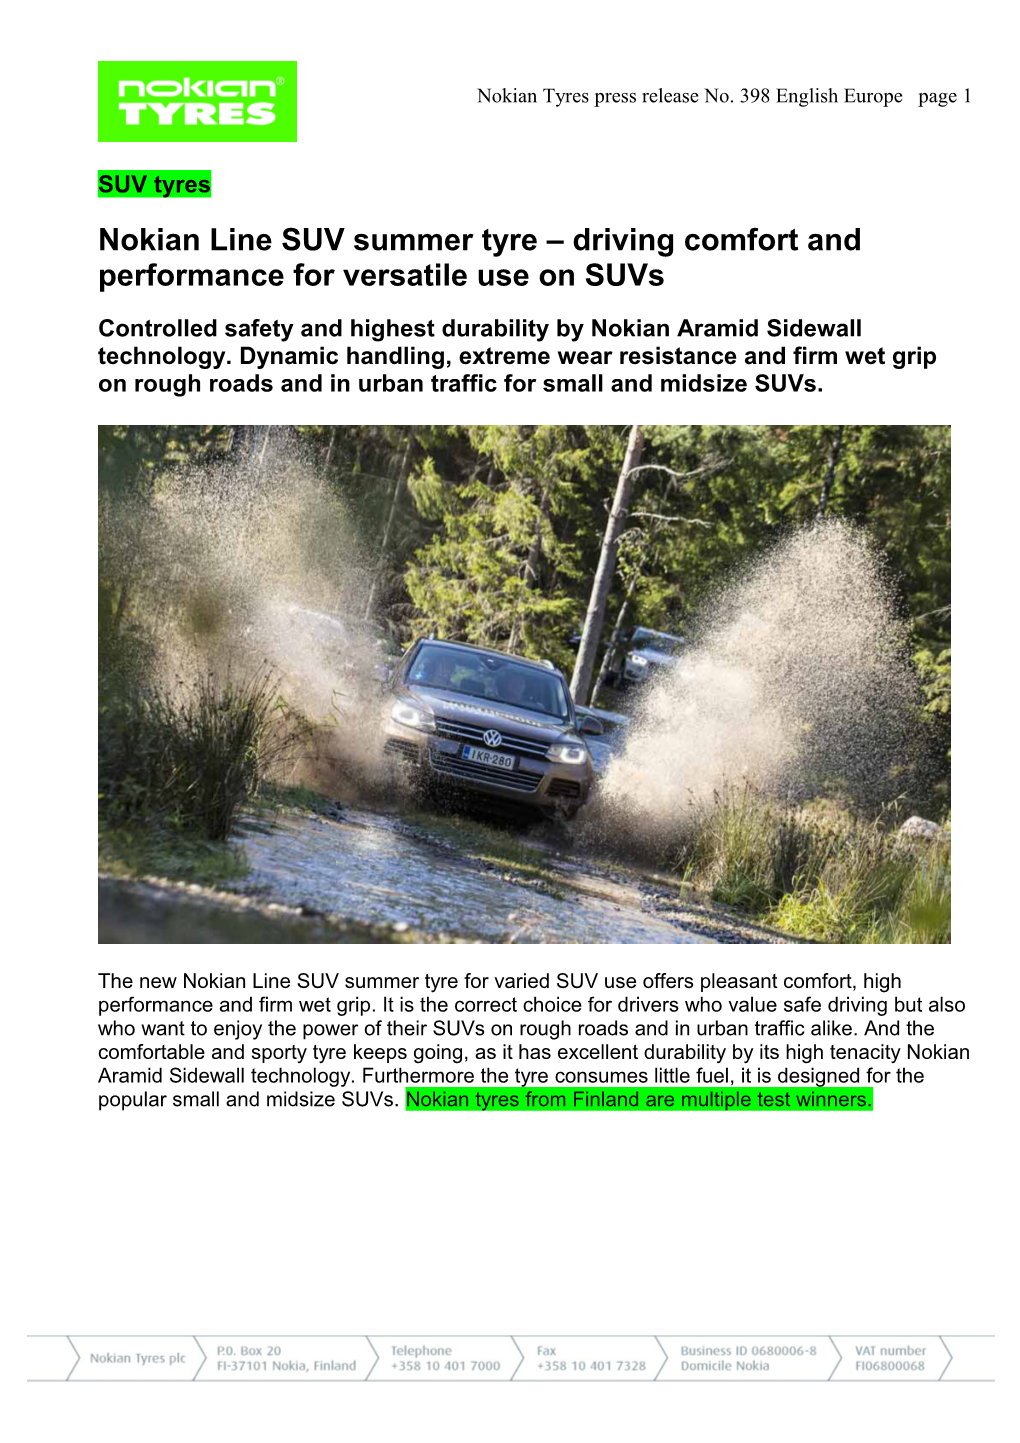 Nokian Tyres Press Release No. 398English Europe Page 1